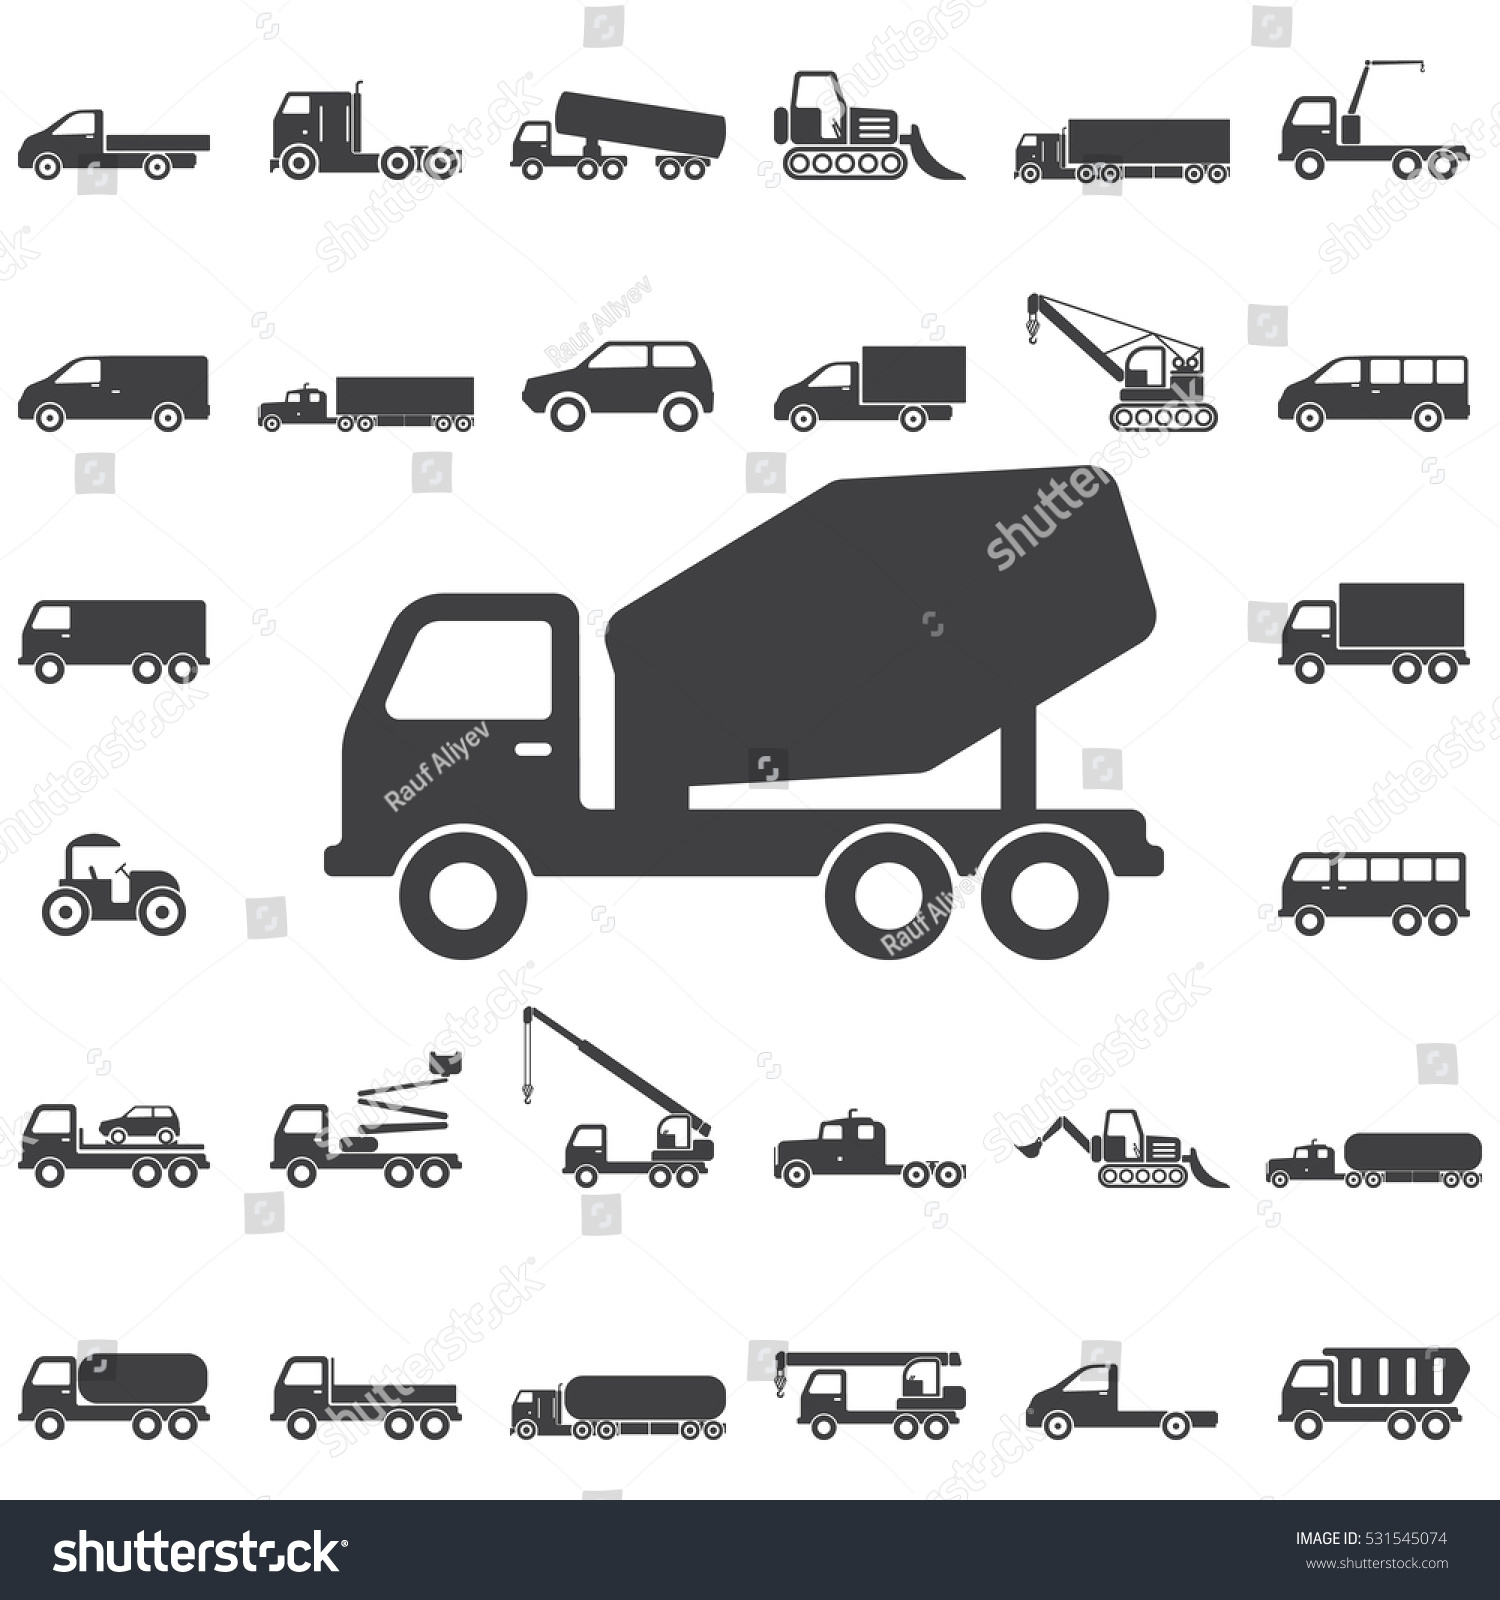 SVG of concrete mixer icon. Transport icons universal set for web and mobile svg